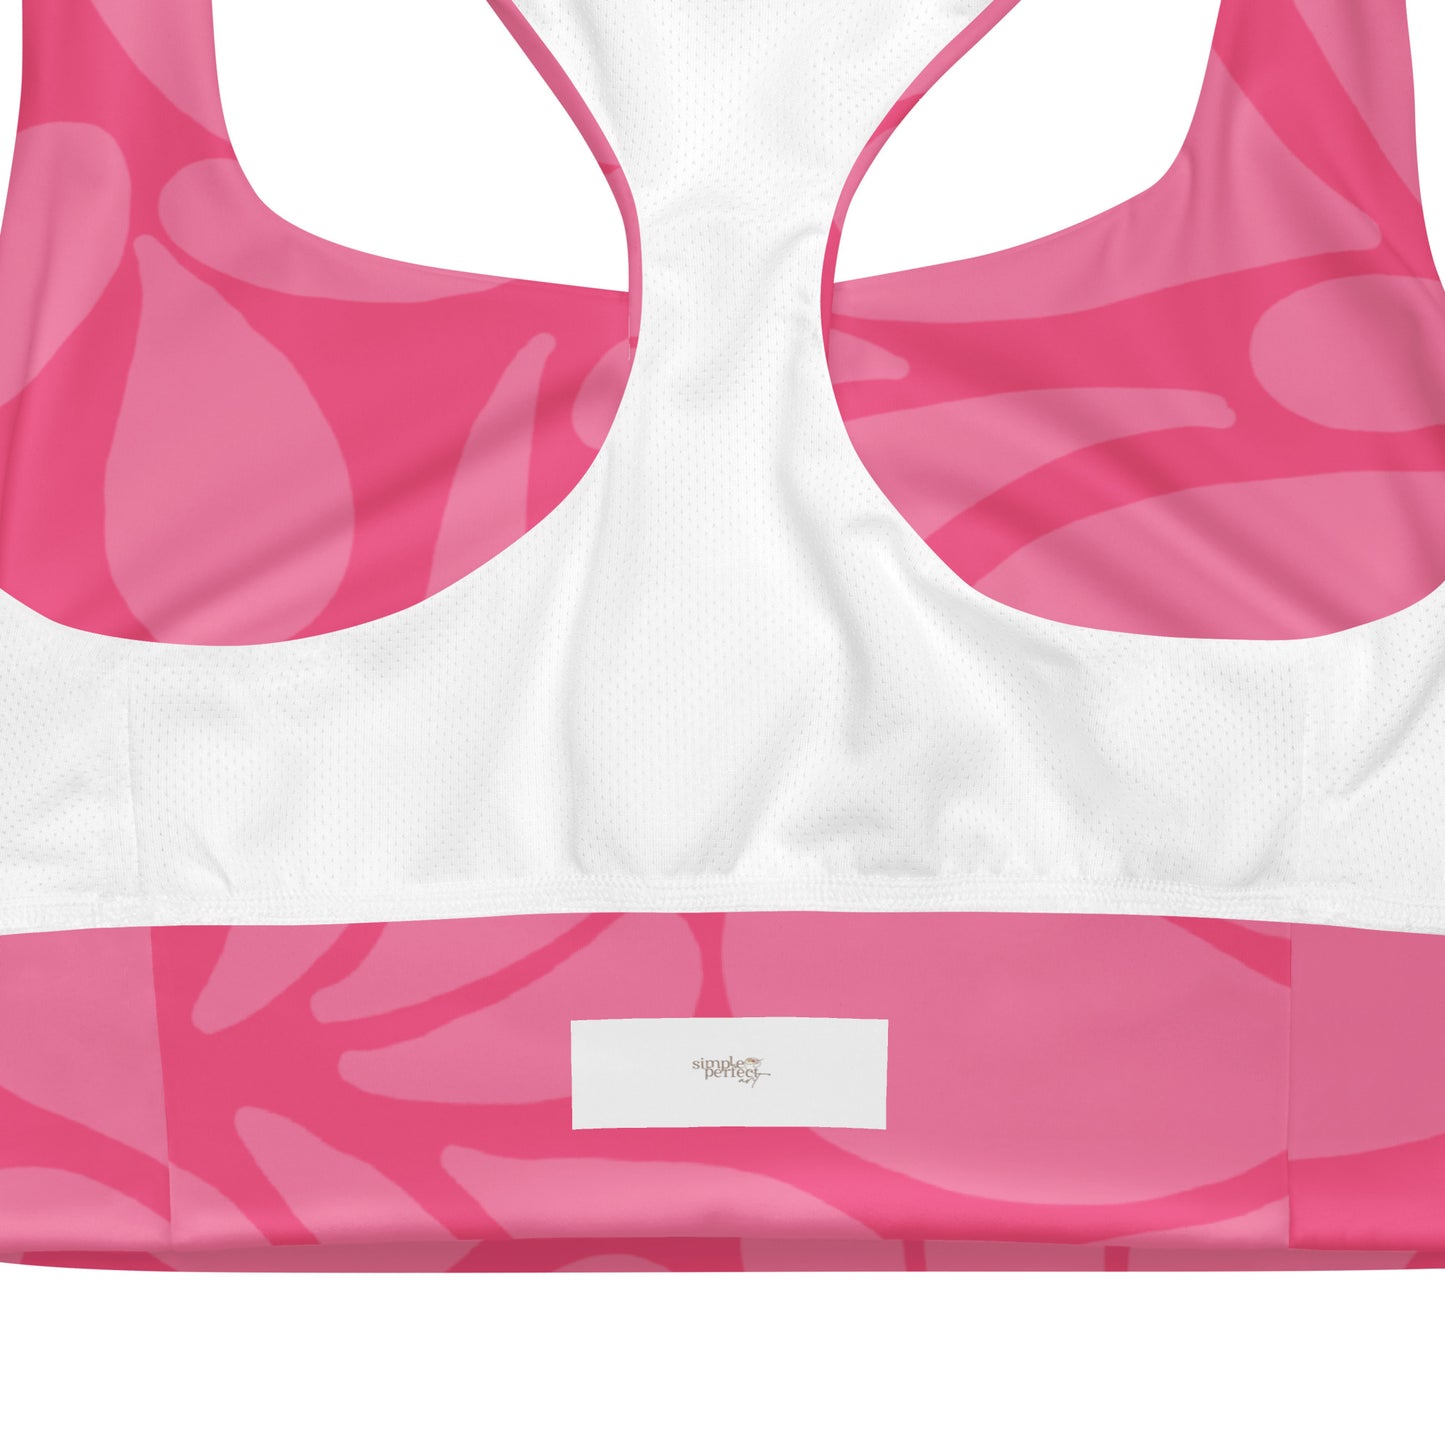 Pinky Heart- Best Supportive Sport Bra-Removable Cups for Bras